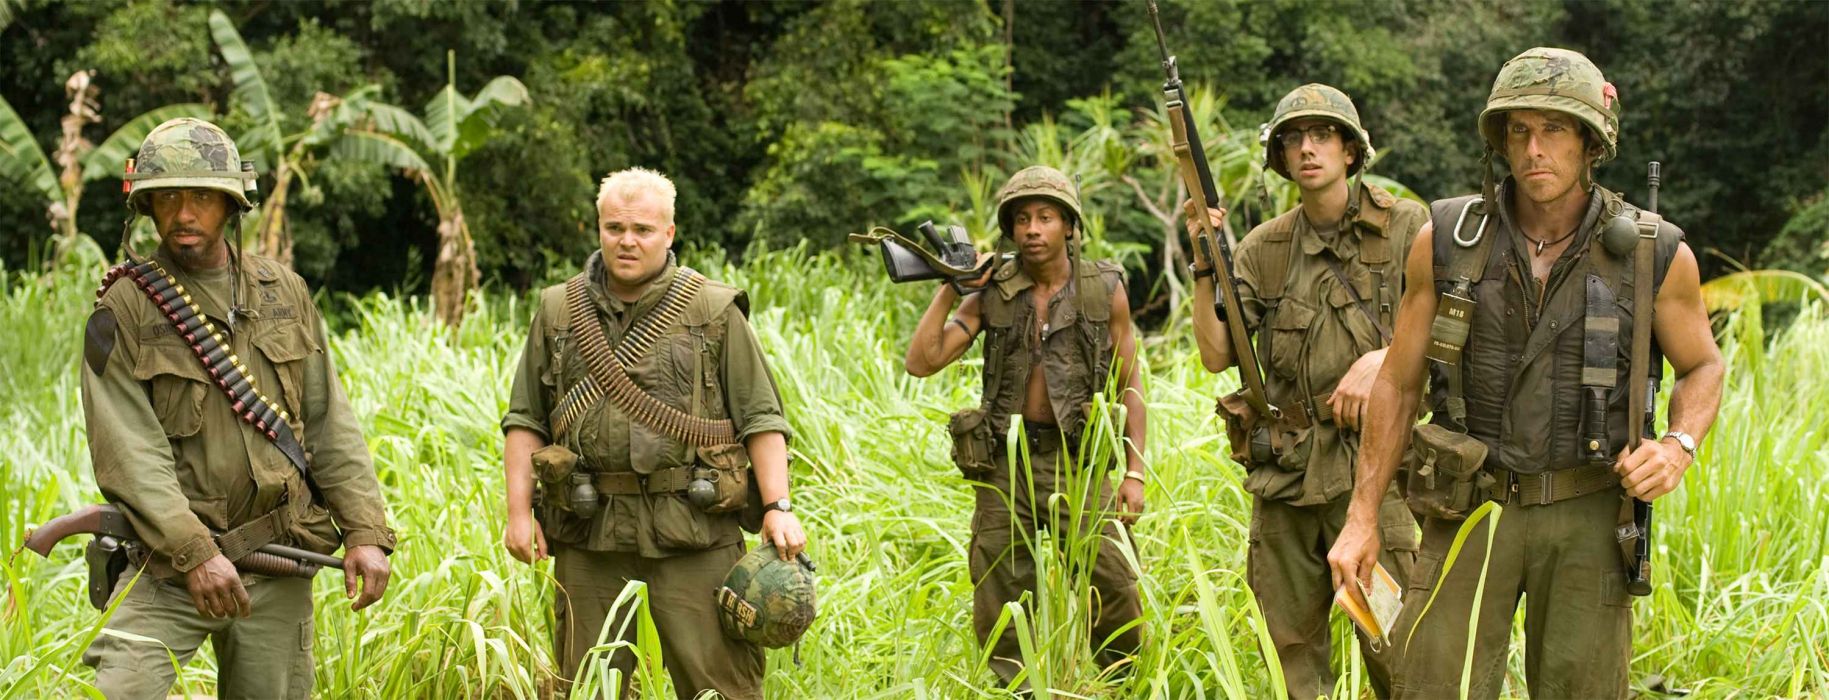 TROPIC THUNDER action comedy military weapon (20) wallpaperx1148